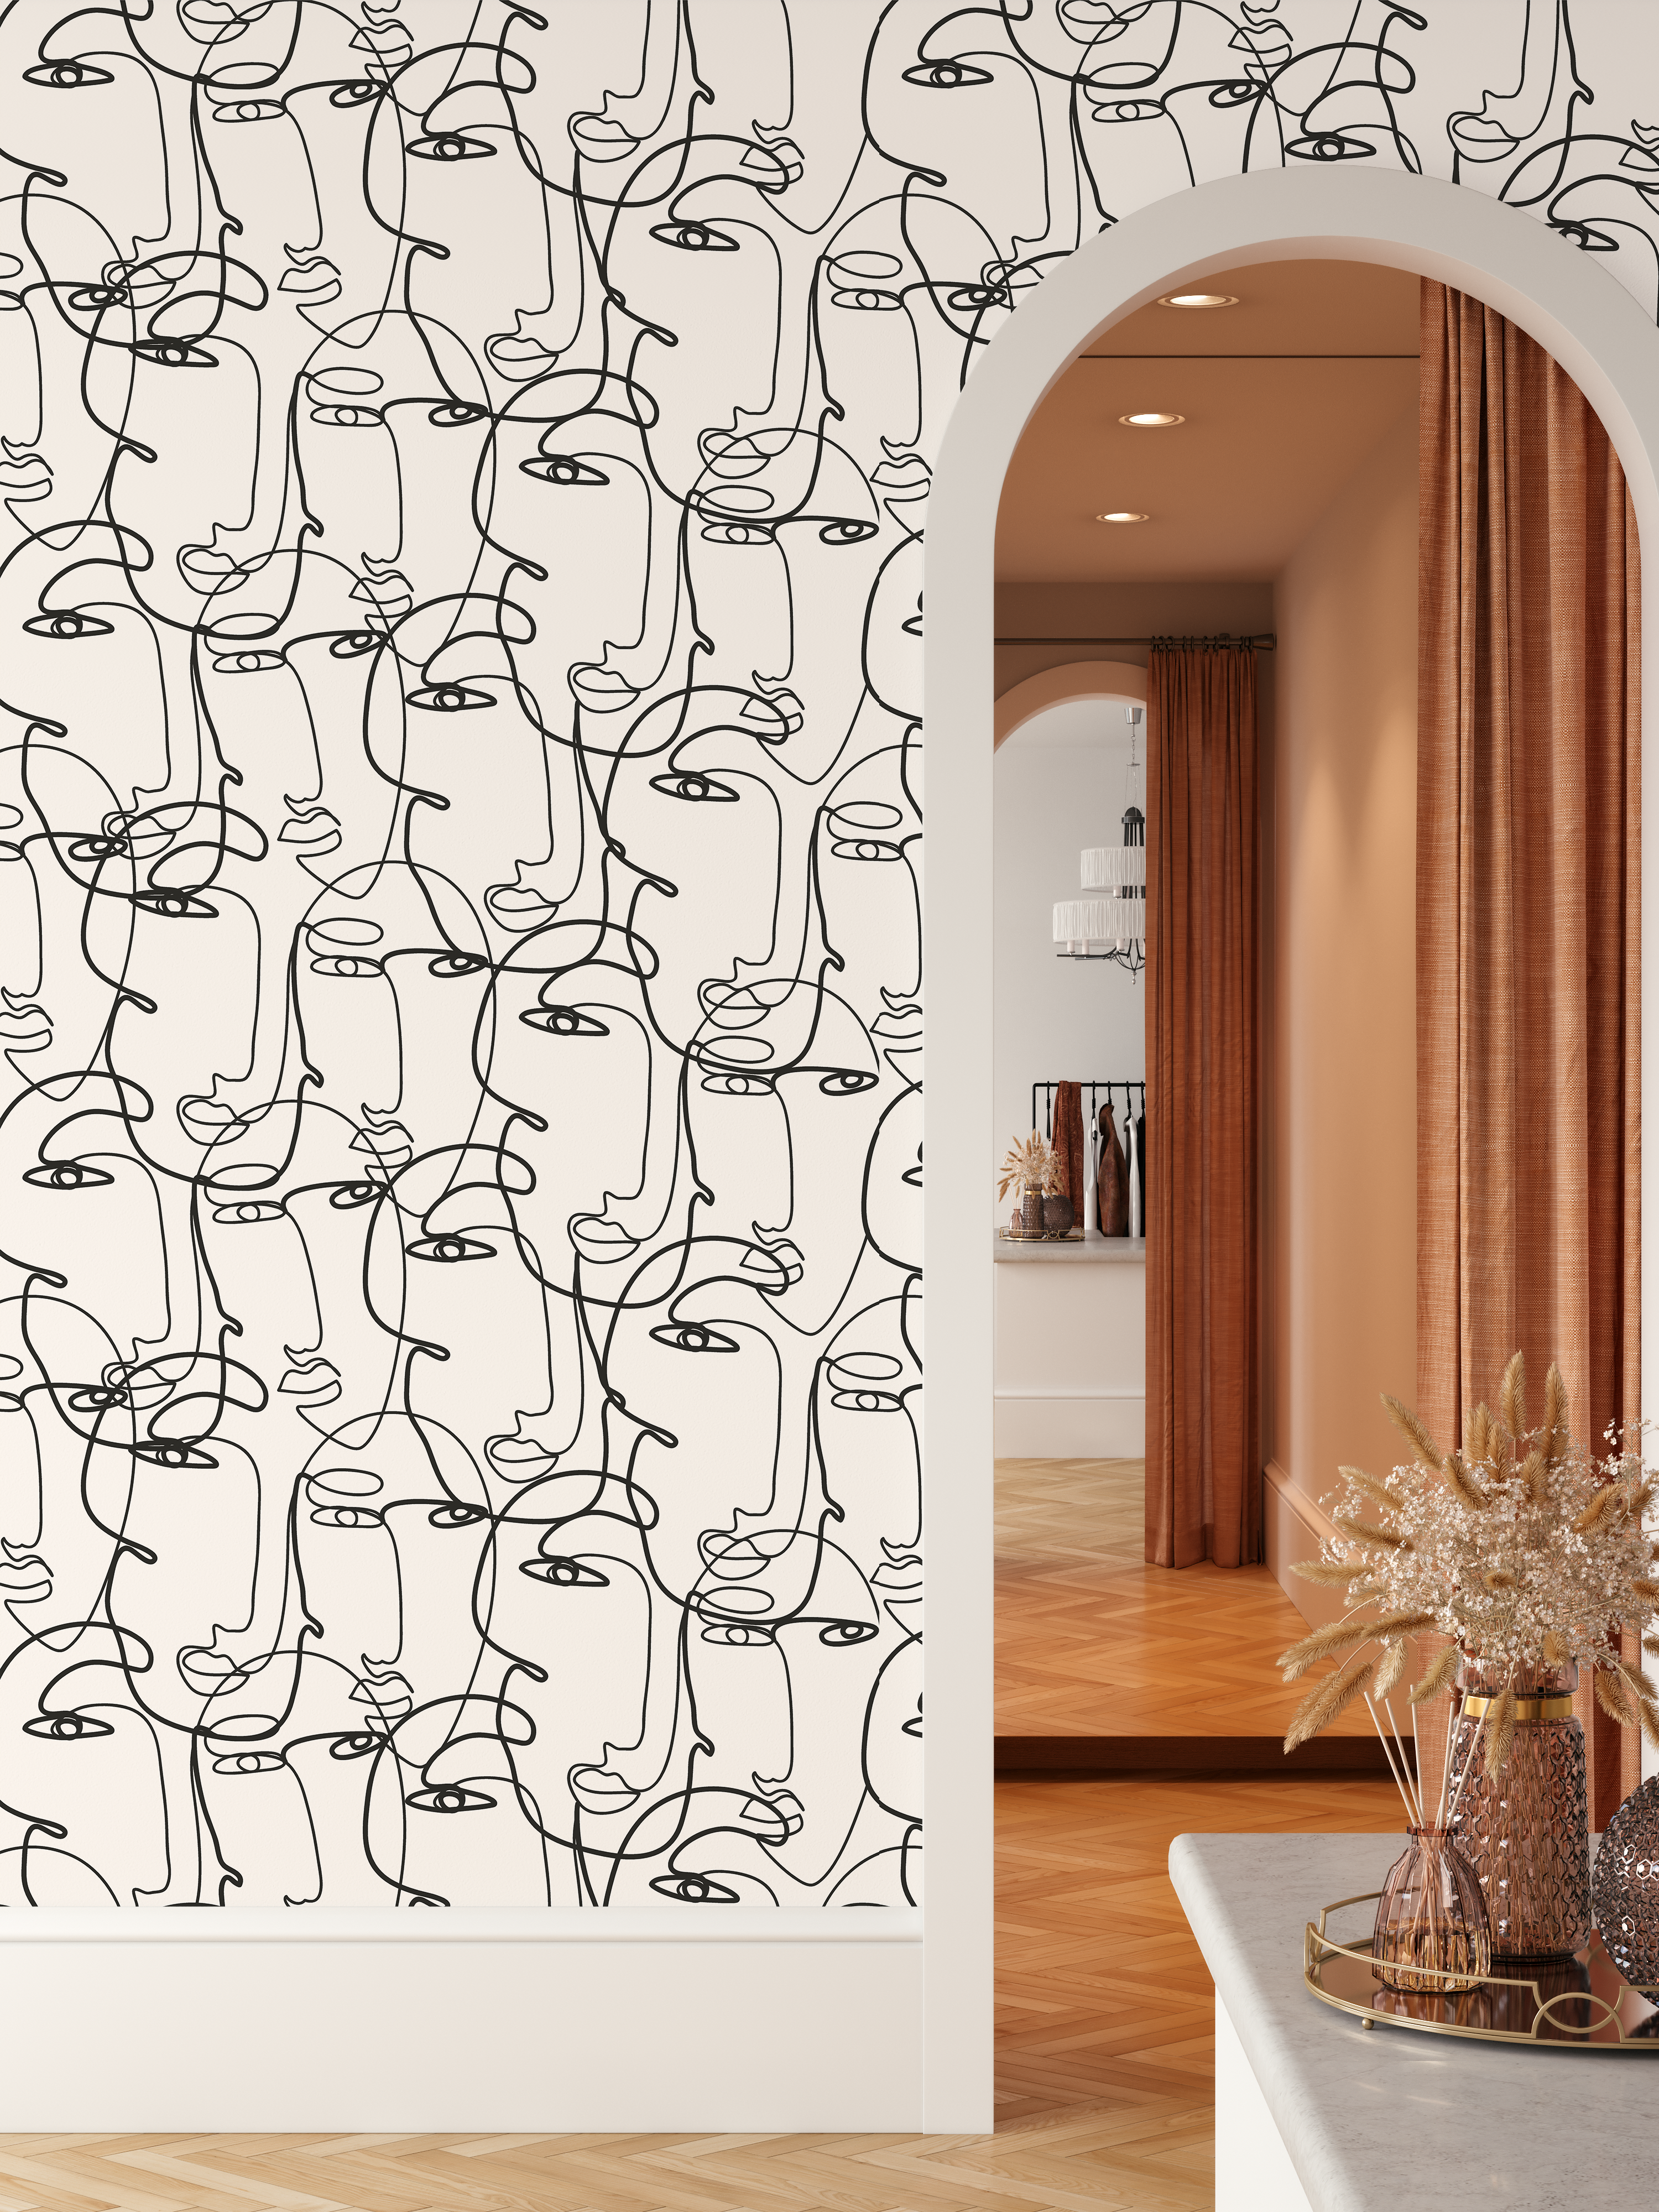 Abstract continuous line art faces wallpaper in a modern home interior with archway and warm accents.&quot;